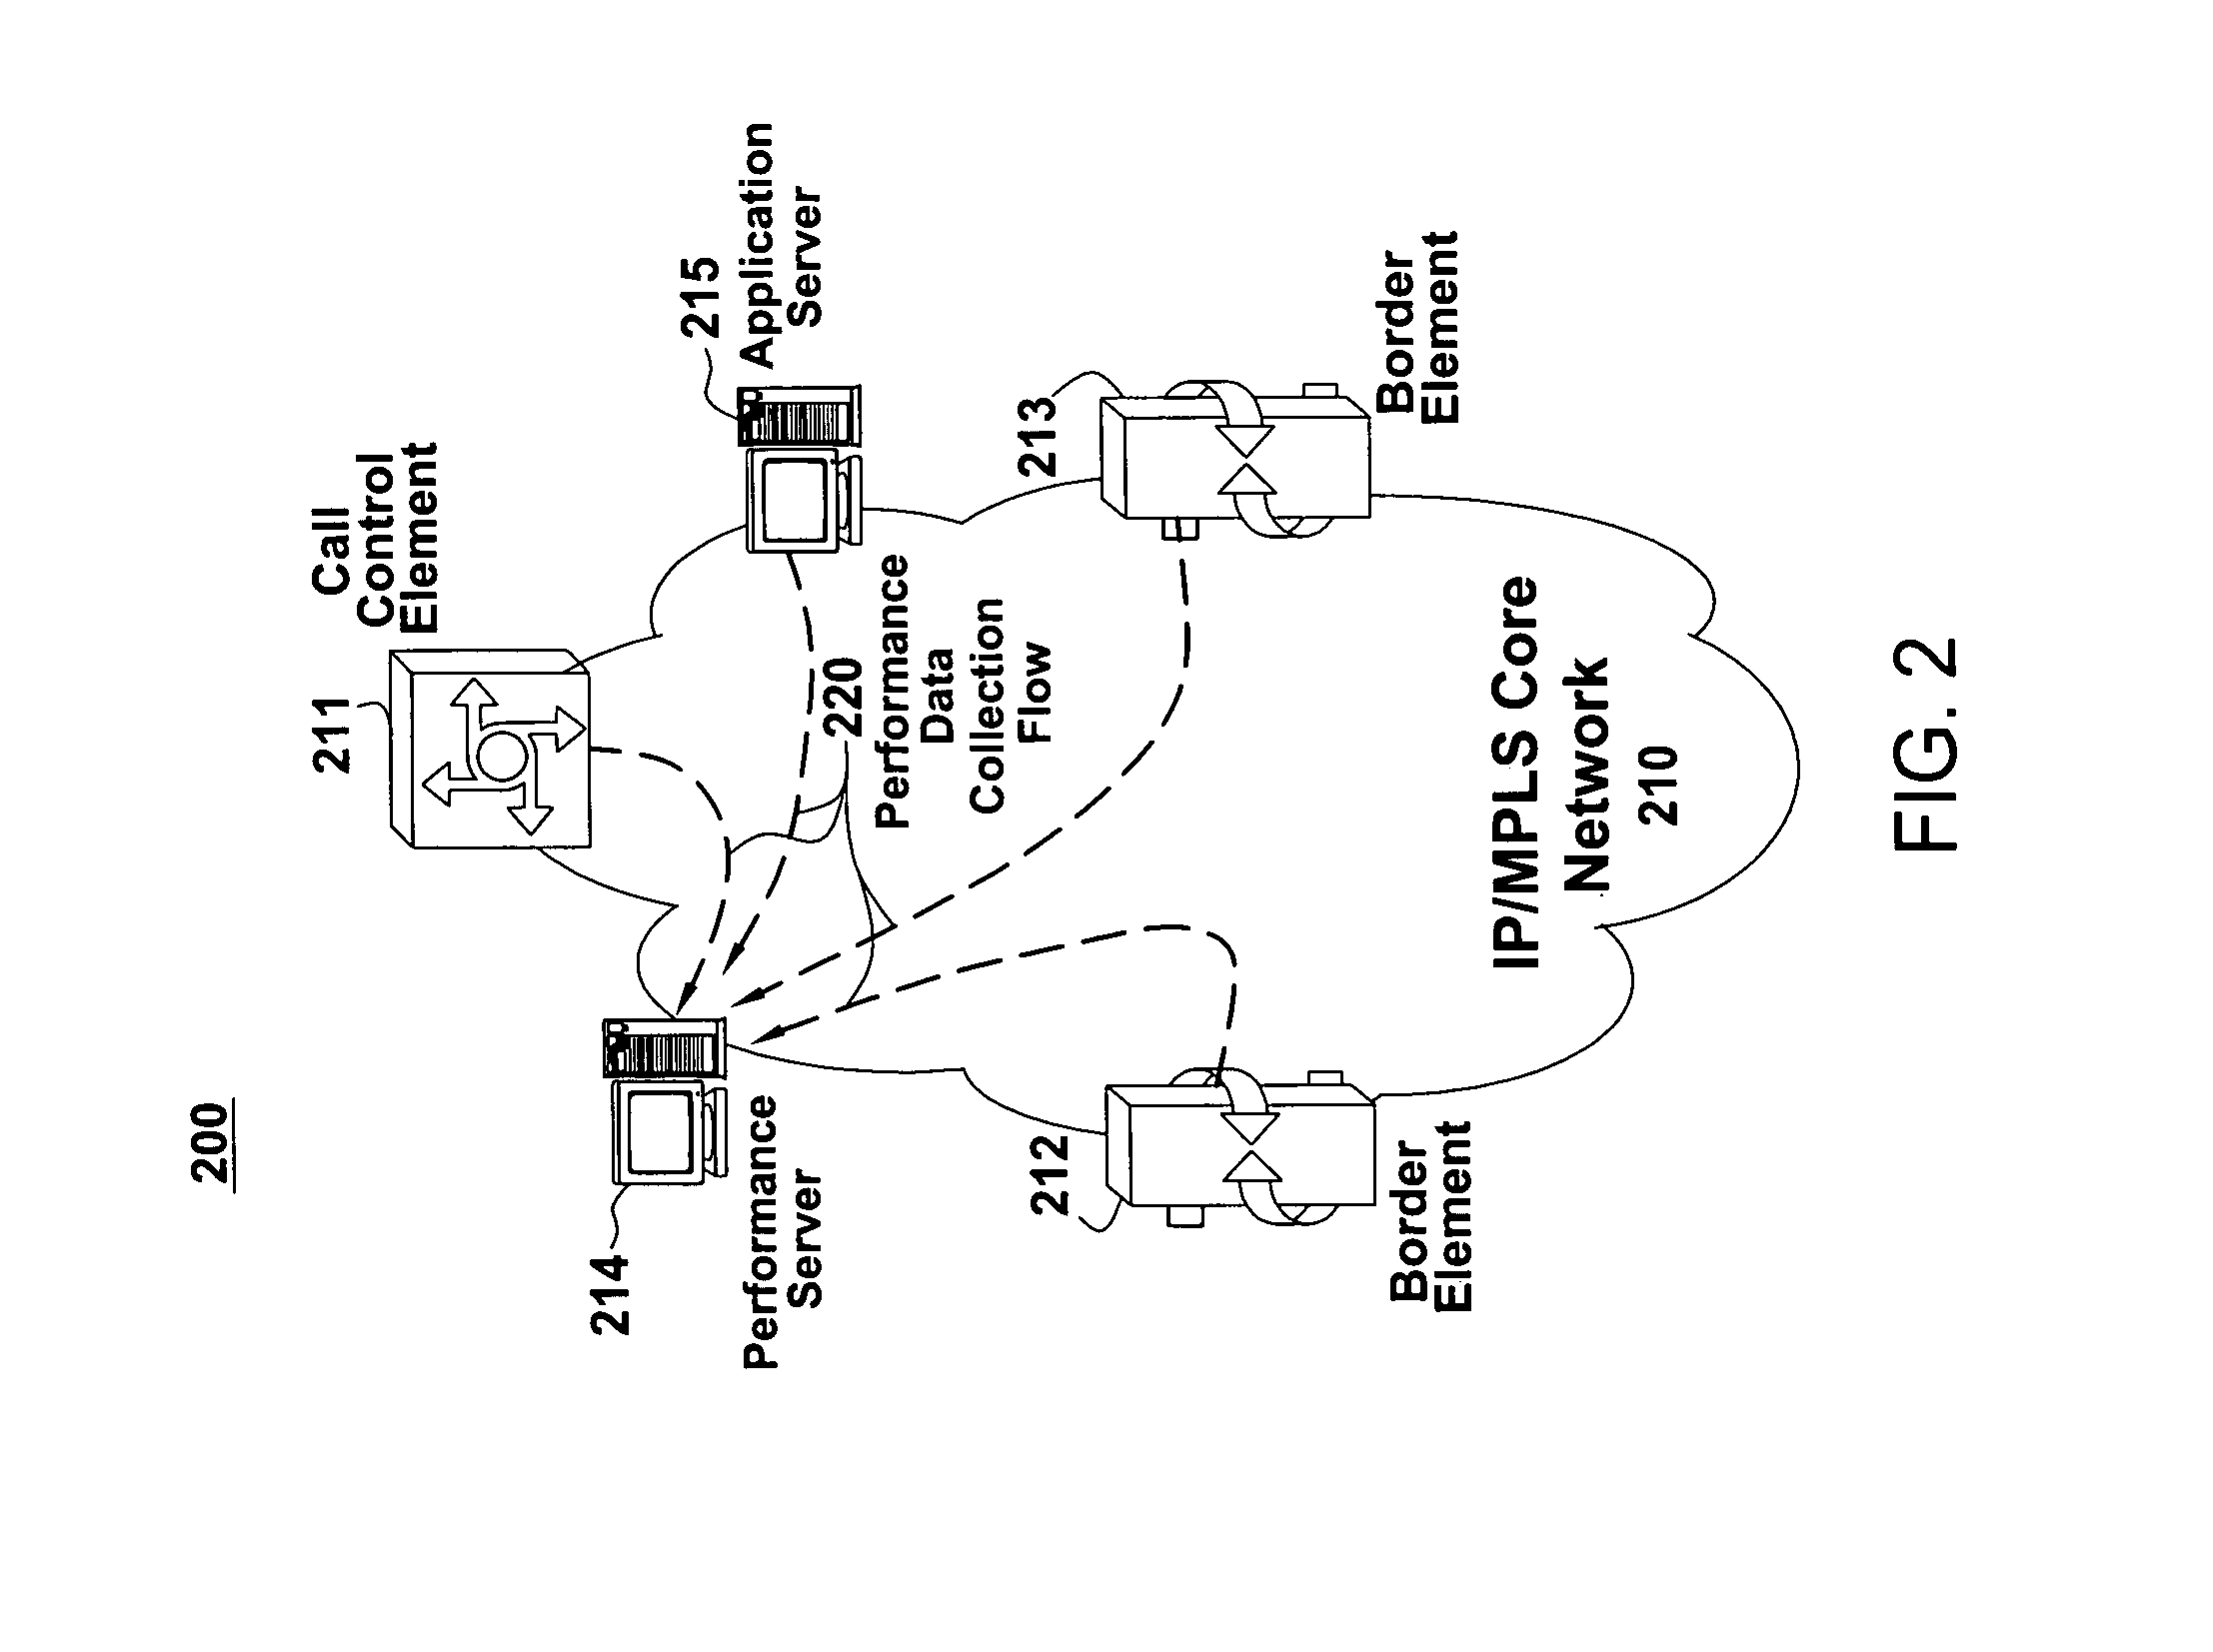 Method and apparatus for monitoring shifts in call patterns